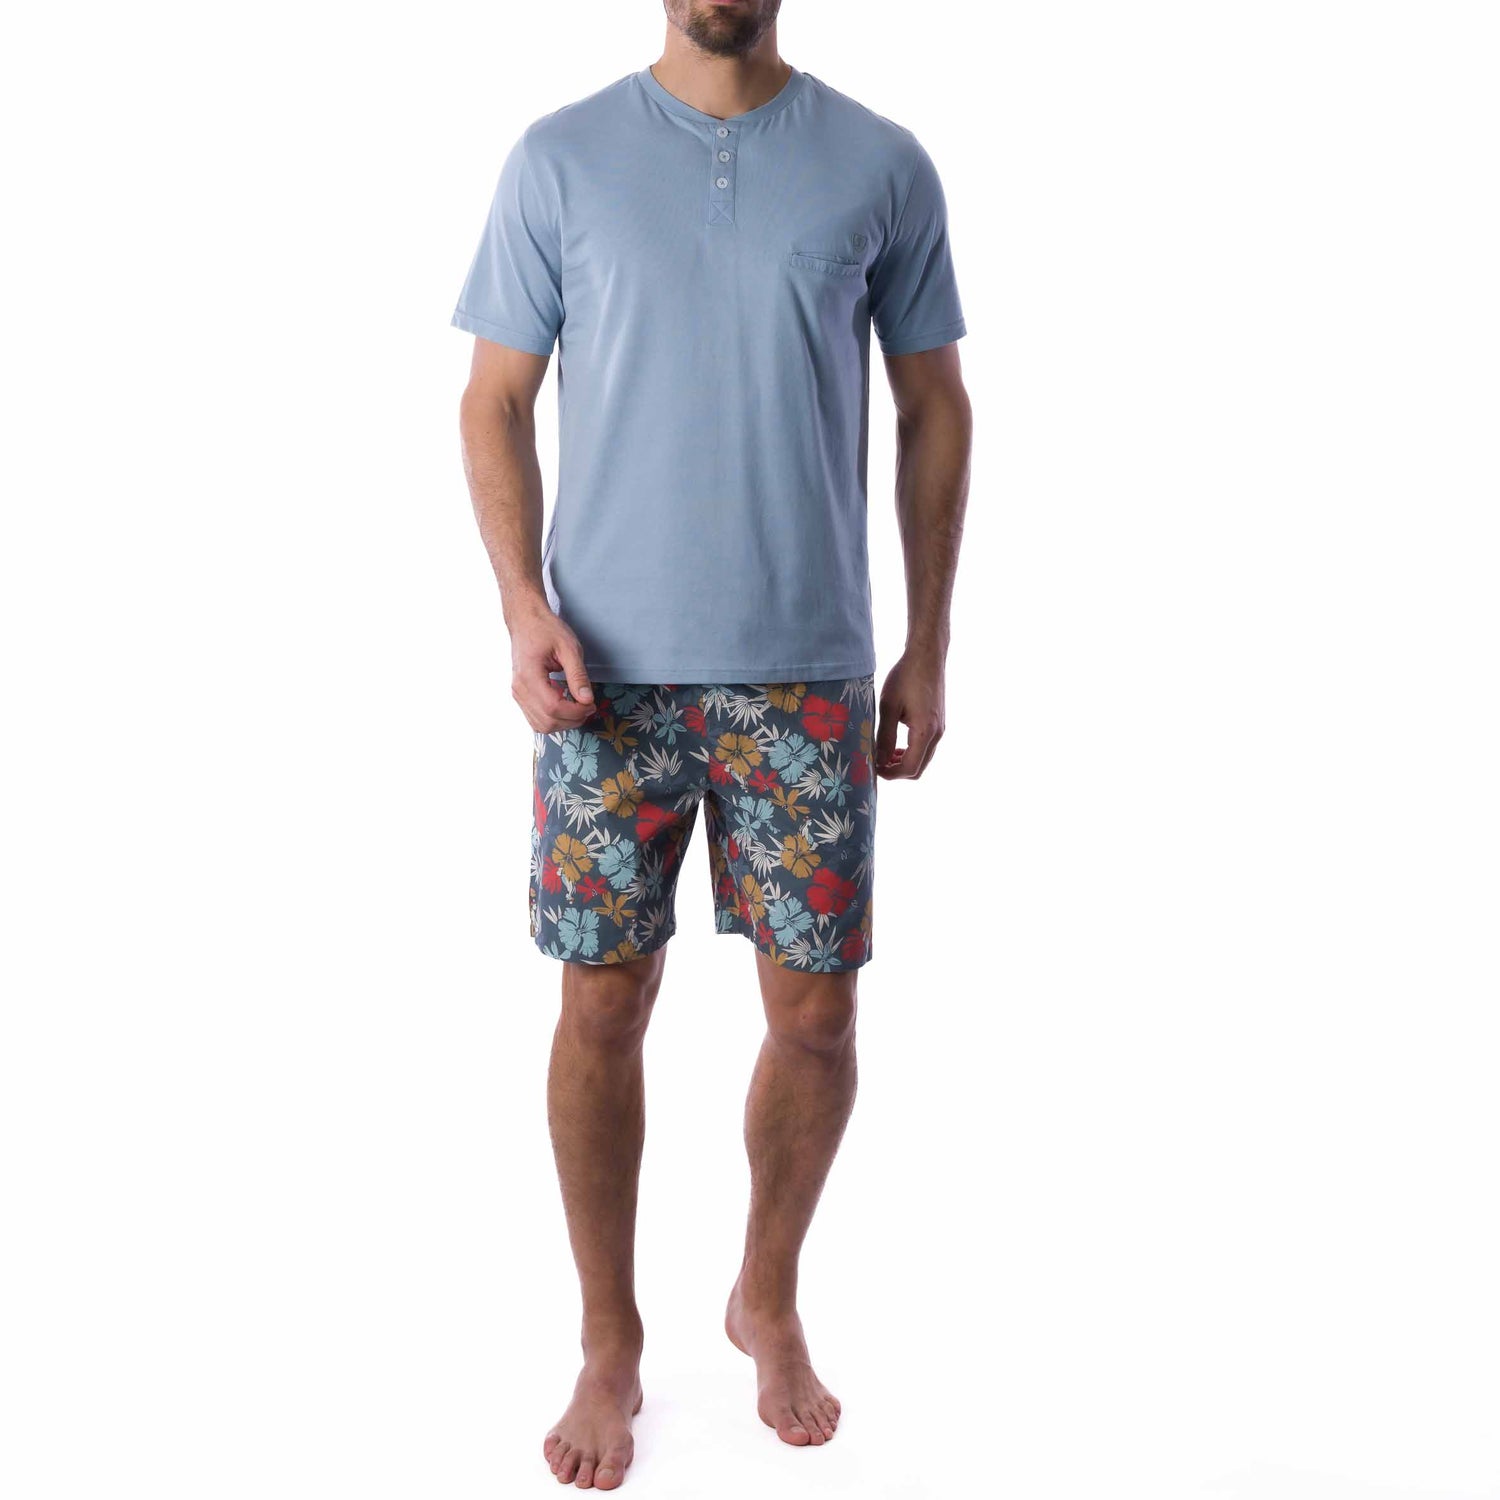 Short Pajamas in Combed Cotton Jersey and Blue and Gray Printed Poplin